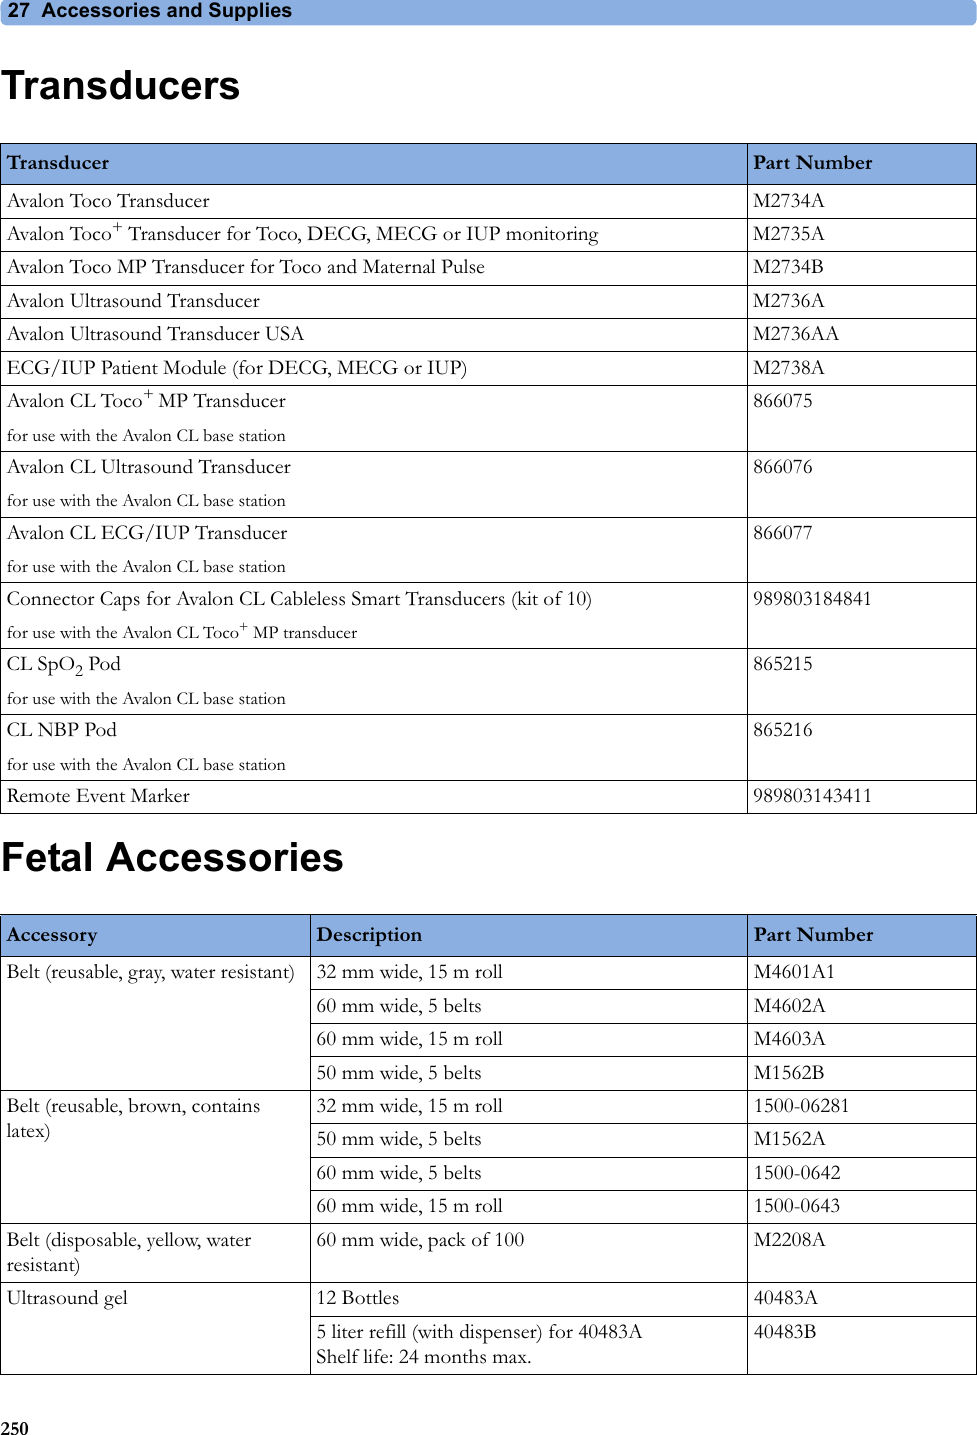 27  Accessories and Supplies250TransducersFetal AccessoriesTransducer Part NumberAvalon Toco Transducer M2734AAvalon Toco+ Transducer for Toco, DECG, MECG or IUP monitoring M2735AAvalon Toco MP Transducer for Toco and Maternal Pulse M2734BAvalon Ultrasound Transducer M2736AAvalon Ultrasound Transducer USA M2736AAECG/IUP Patient Module (for DECG, MECG or IUP) M2738AAvalon CL Toco+ MP Transducerfor use with the Avalon CL base station866075Avalon CL Ultrasound Transducerfor use with the Avalon CL base station866076Avalon CL ECG/IUP Transducerfor use with the Avalon CL base station866077Connector Caps for Avalon CL Cableless Smart Transducers (kit of 10)for use with the Avalon CL Toco+ MP transducer989803184841CL SpO2 Podfor use with the Avalon CL base station865215CL NBP Podfor use with the Avalon CL base station865216Remote Event Marker 989803143411Accessory Description Part NumberBelt (reusable, gray, water resistant) 32 mm wide, 15 m roll M4601A160 mm wide, 5 belts M4602A60 mm wide, 15 m roll M4603A50 mm wide, 5 belts M1562BBelt (reusable, brown, contains latex)32 mm wide, 15 m roll 1500-0628150 mm wide, 5 belts M1562A60 mm wide, 5 belts 1500-064260 mm wide, 15 m roll 1500-0643Belt (disposable, yellow, water resistant)60 mm wide, pack of 100 M2208AUltrasound gel 12 Bottles 40483A5 liter refill (with dispenser) for 40483A Shelf life: 24 months max.40483B